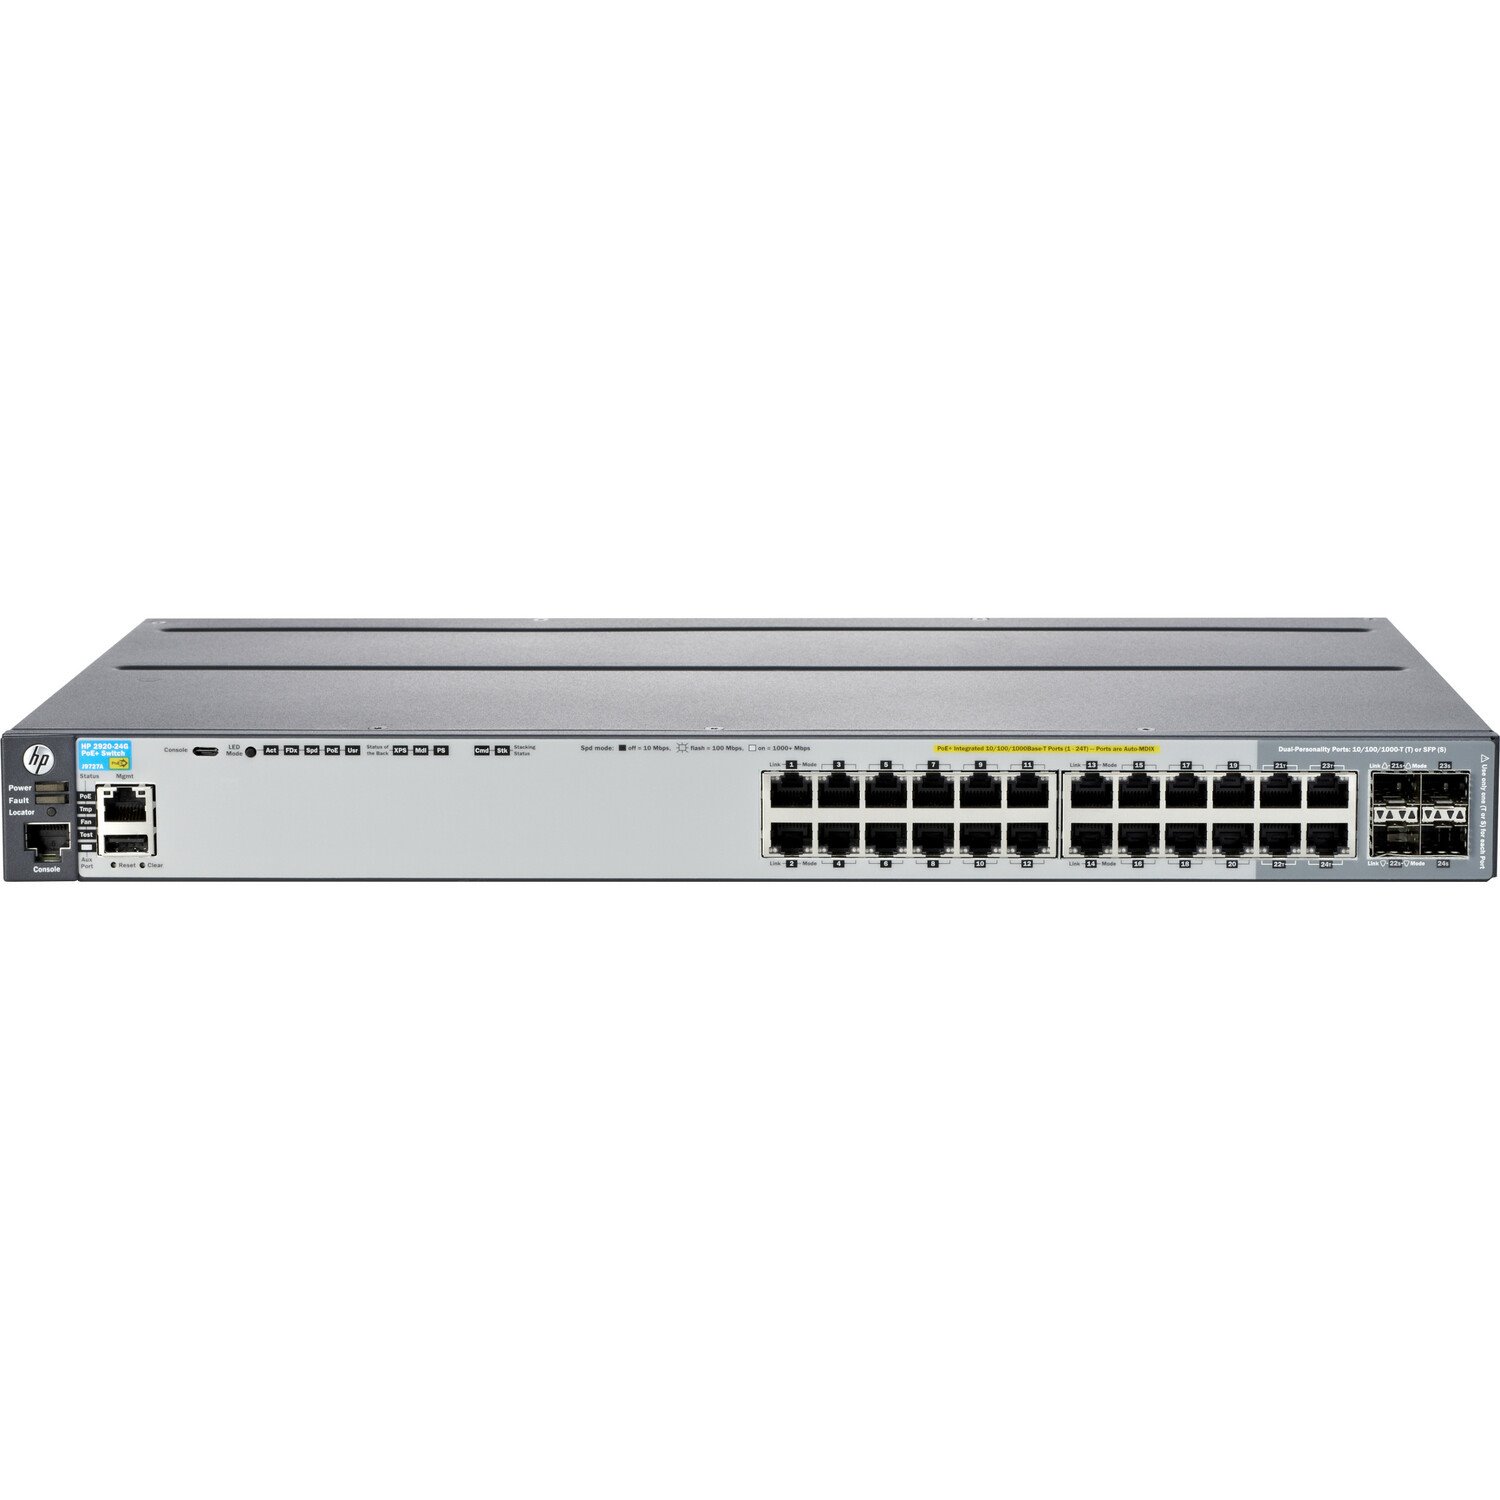 HPE-IMSourcing 2920-24G-POE+ Switch